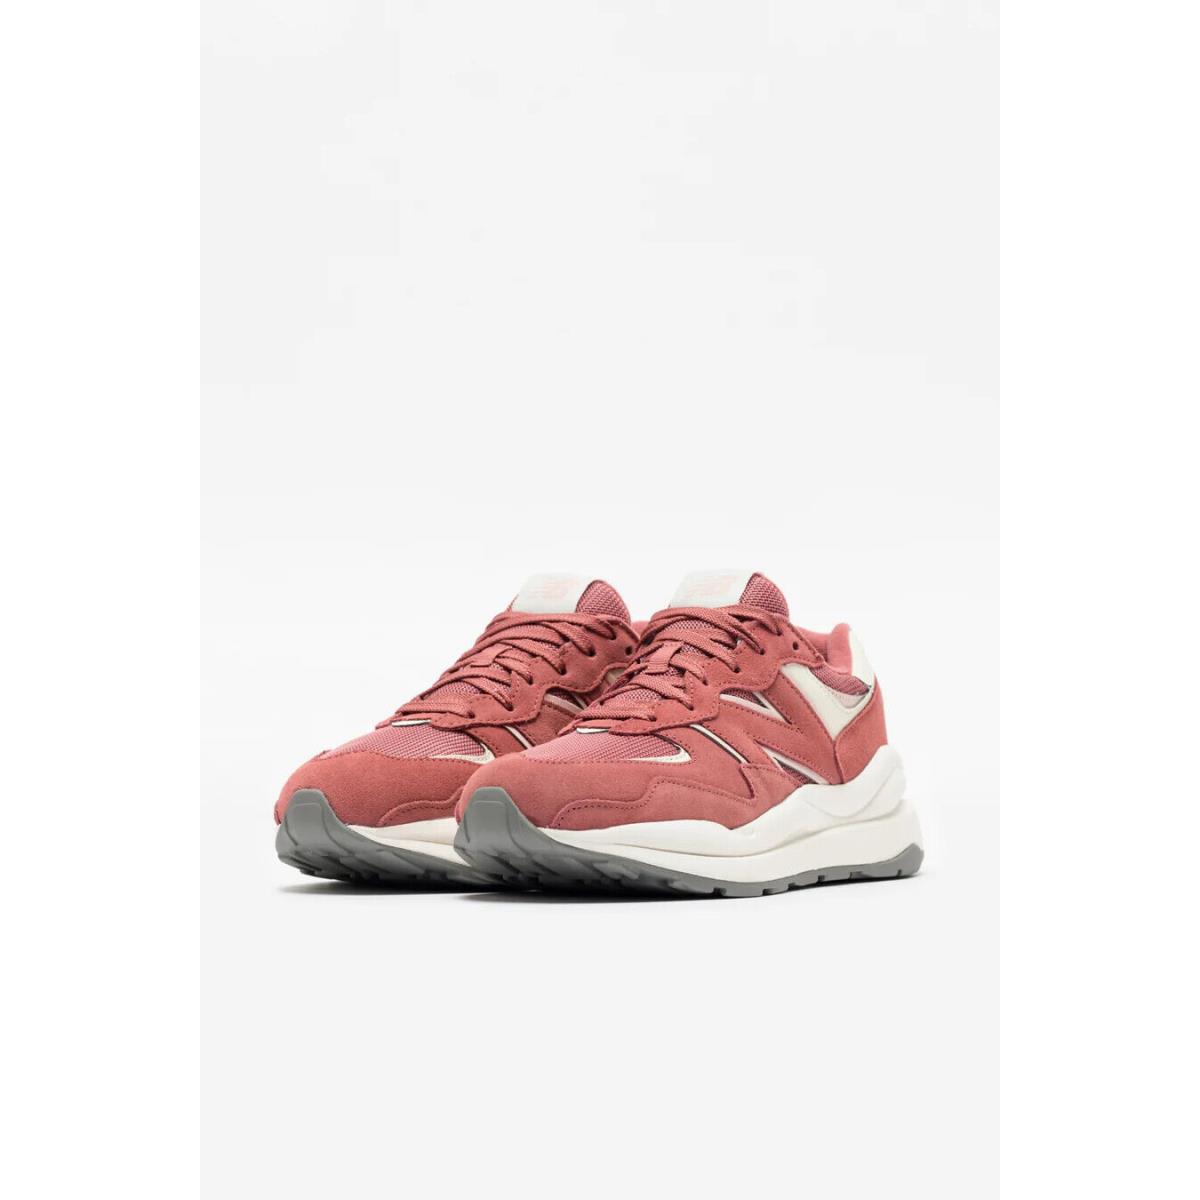 New Balance shoes  - Henna/Oyster Pink 7